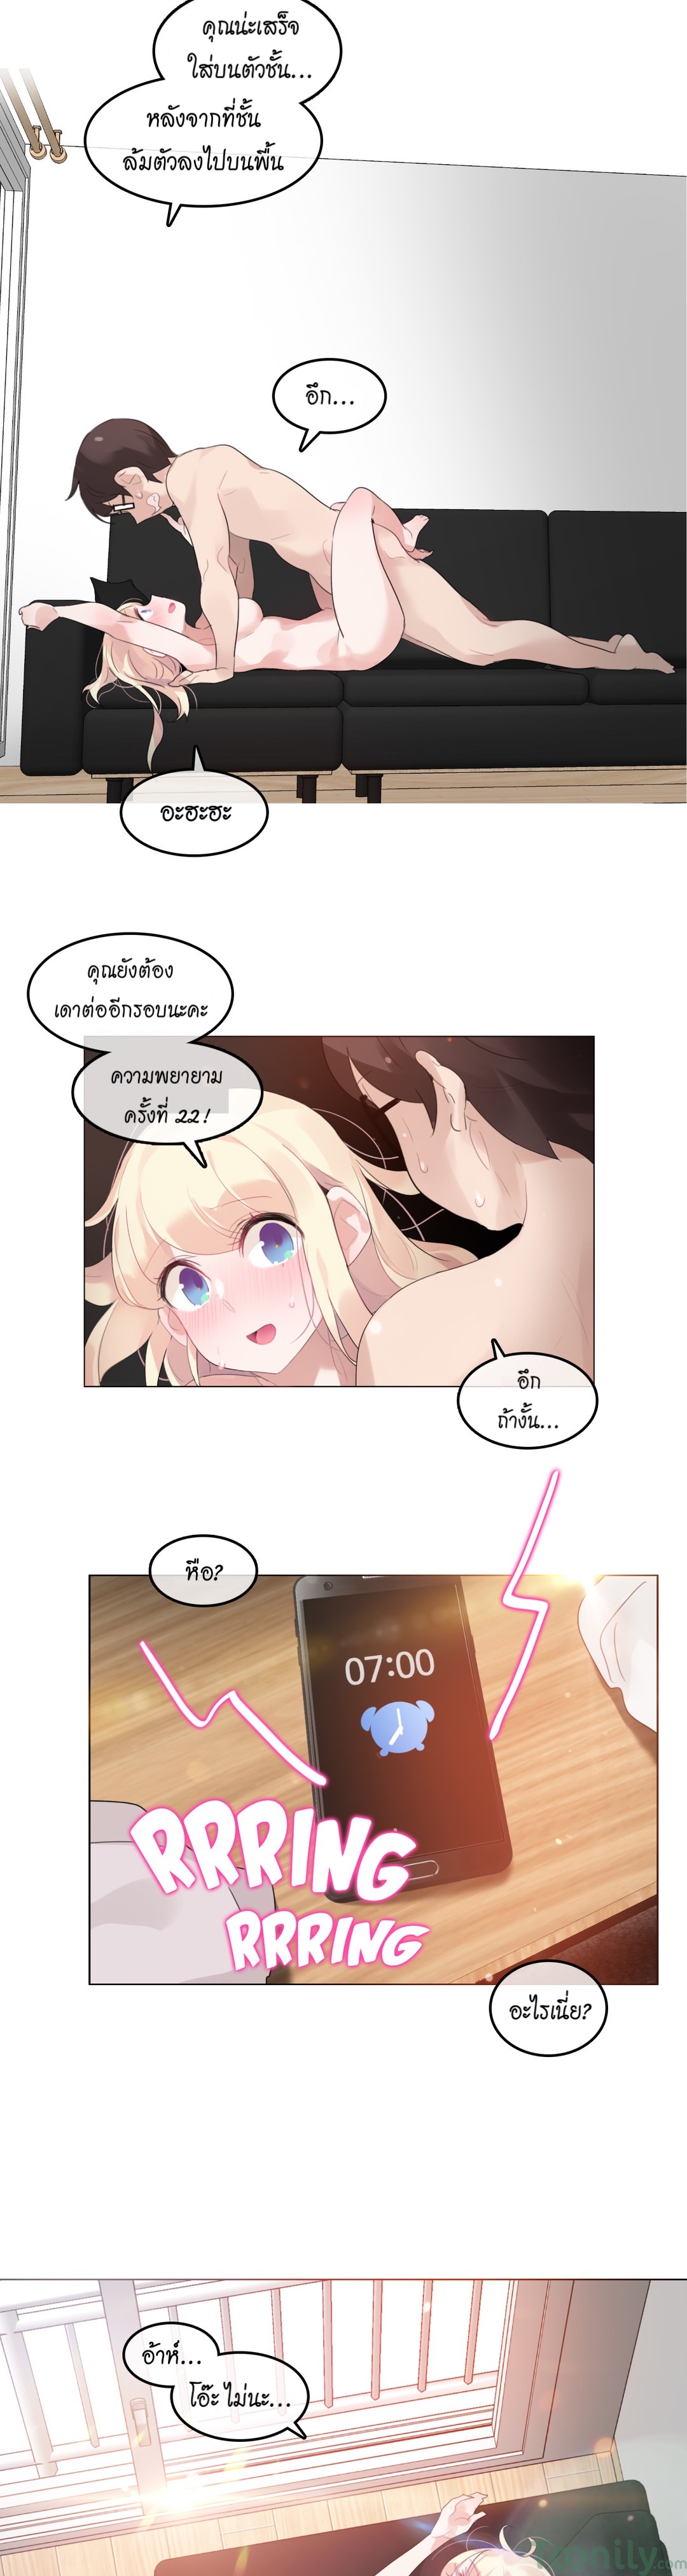 A Pervert’s Daily Life60 (16)